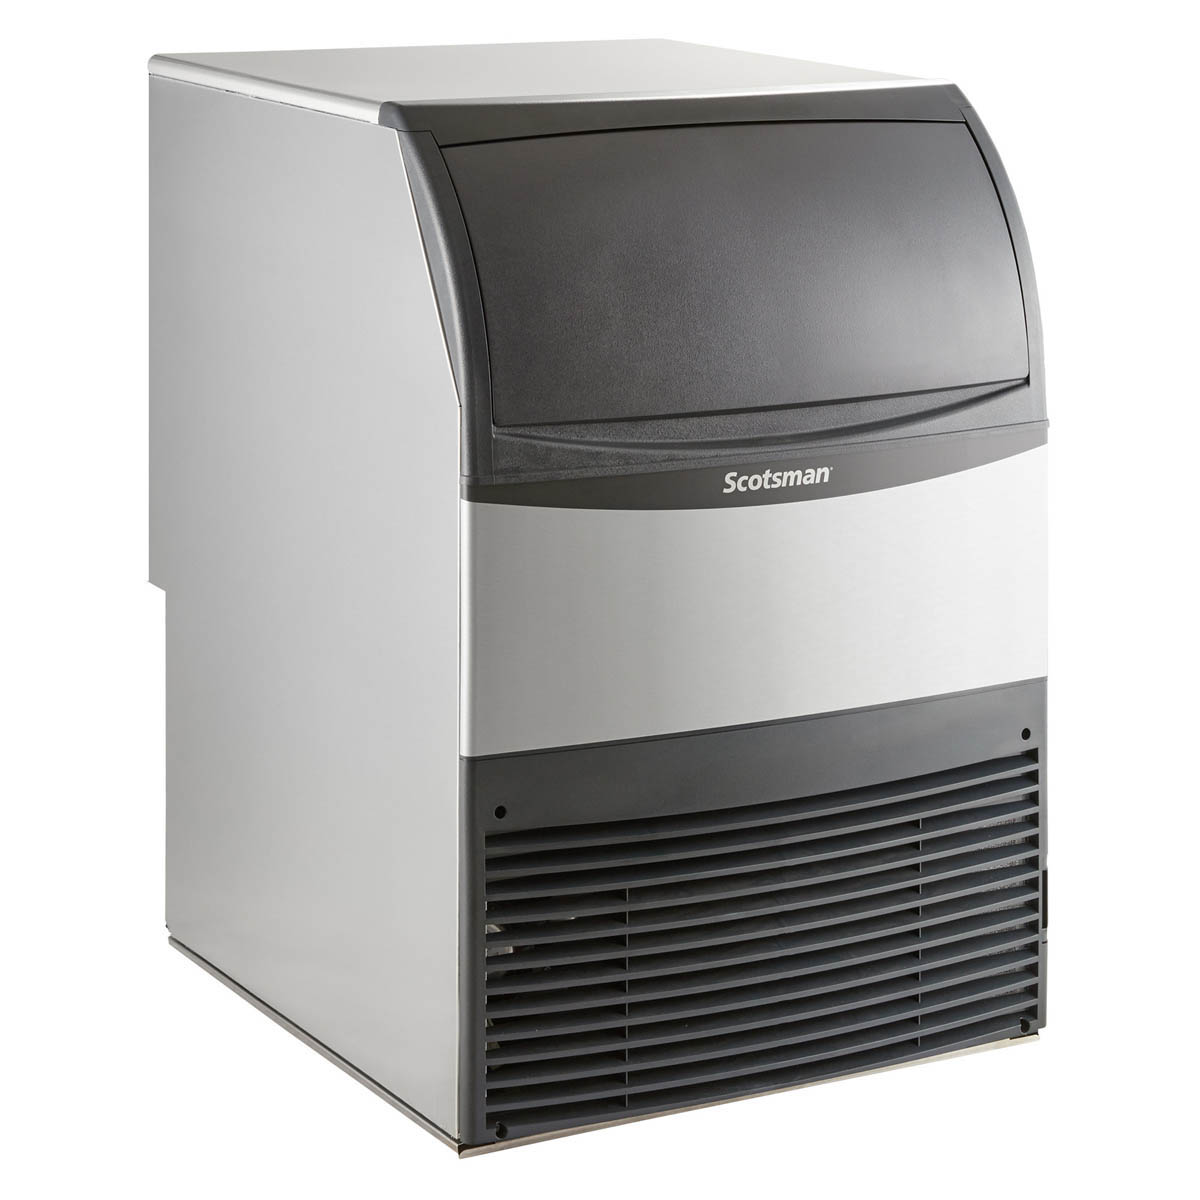 Scotsman UN324A-1 Provides Soft and Slow Melting For Your Service and Displays, Chef's Deal